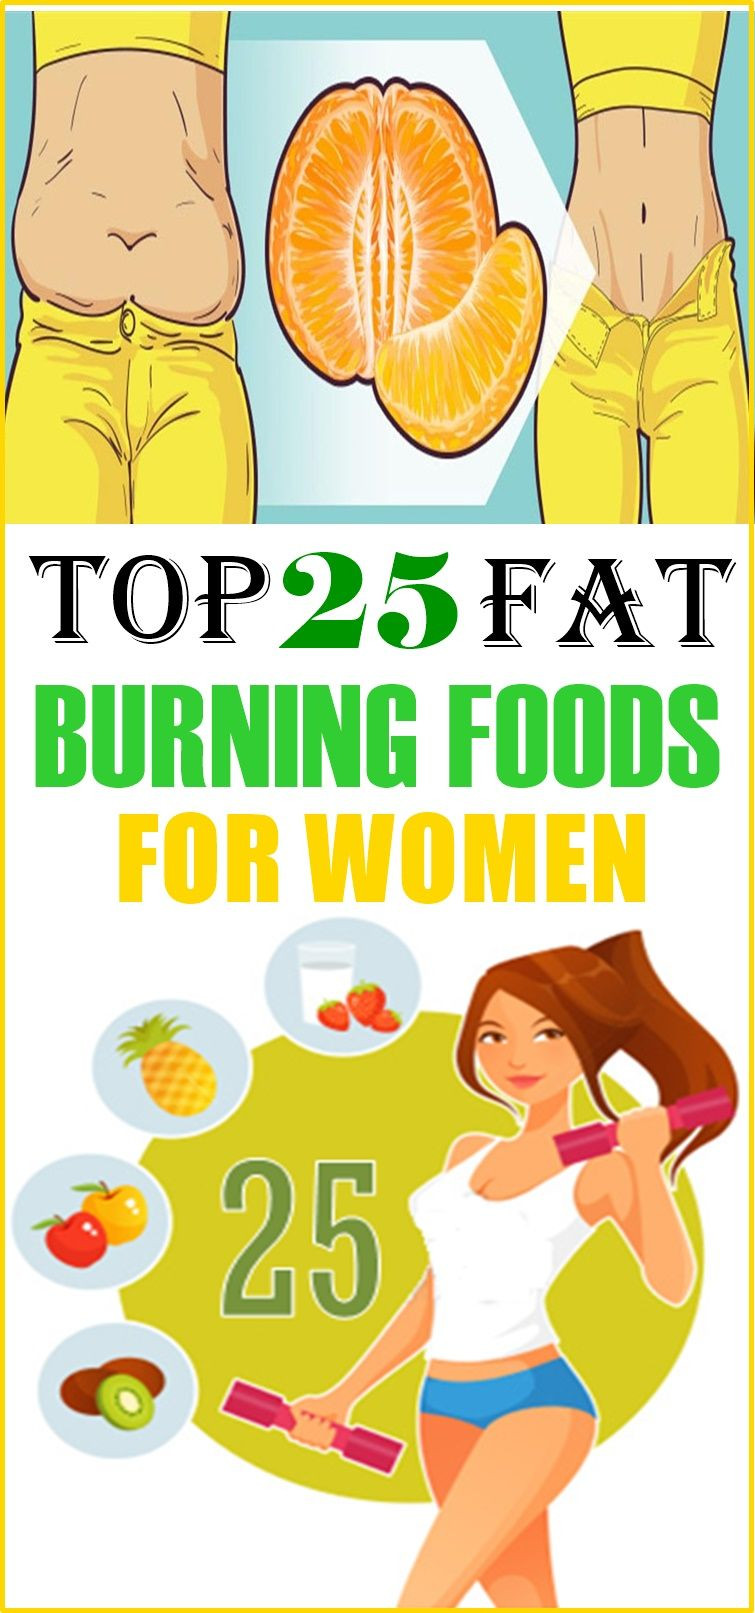 Fat Burning Foods Thigh
 THE TOP 25 FAT BURNING FOODS FOR WOMEN